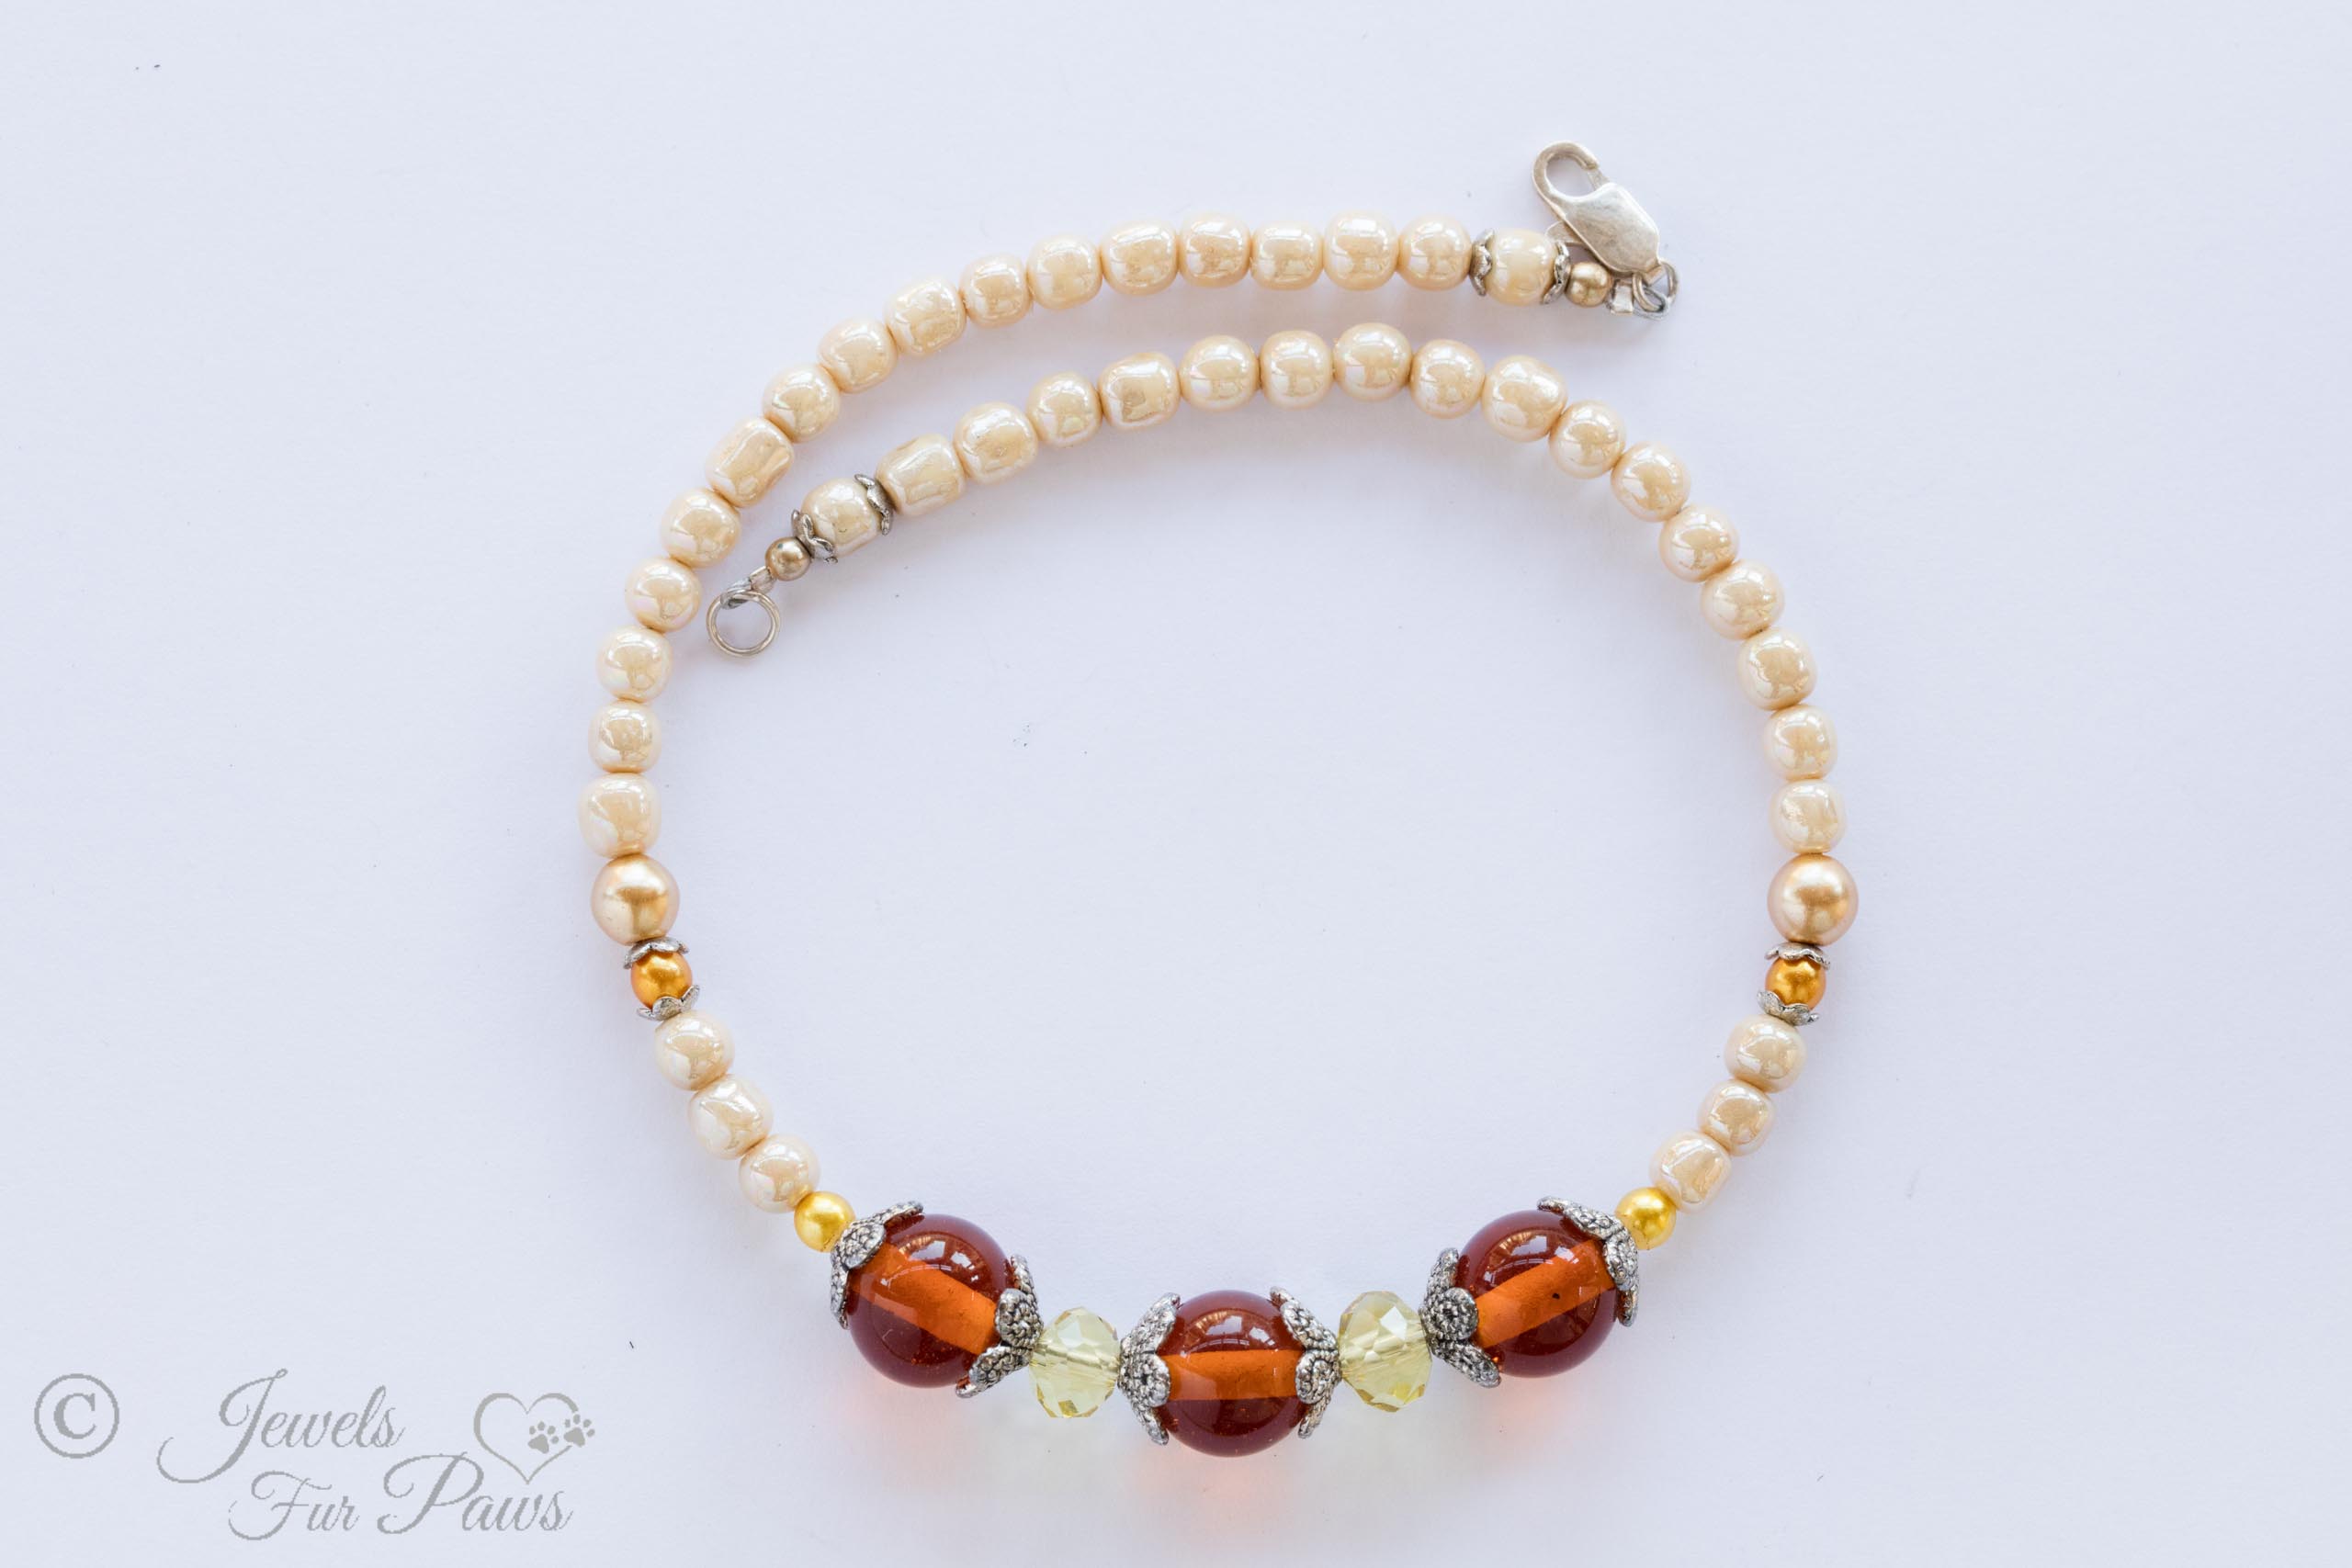 dog cat pet necklace vintage japanese round amber glass beads with baroque pearls swarovski crystals and silver spacers on a white background